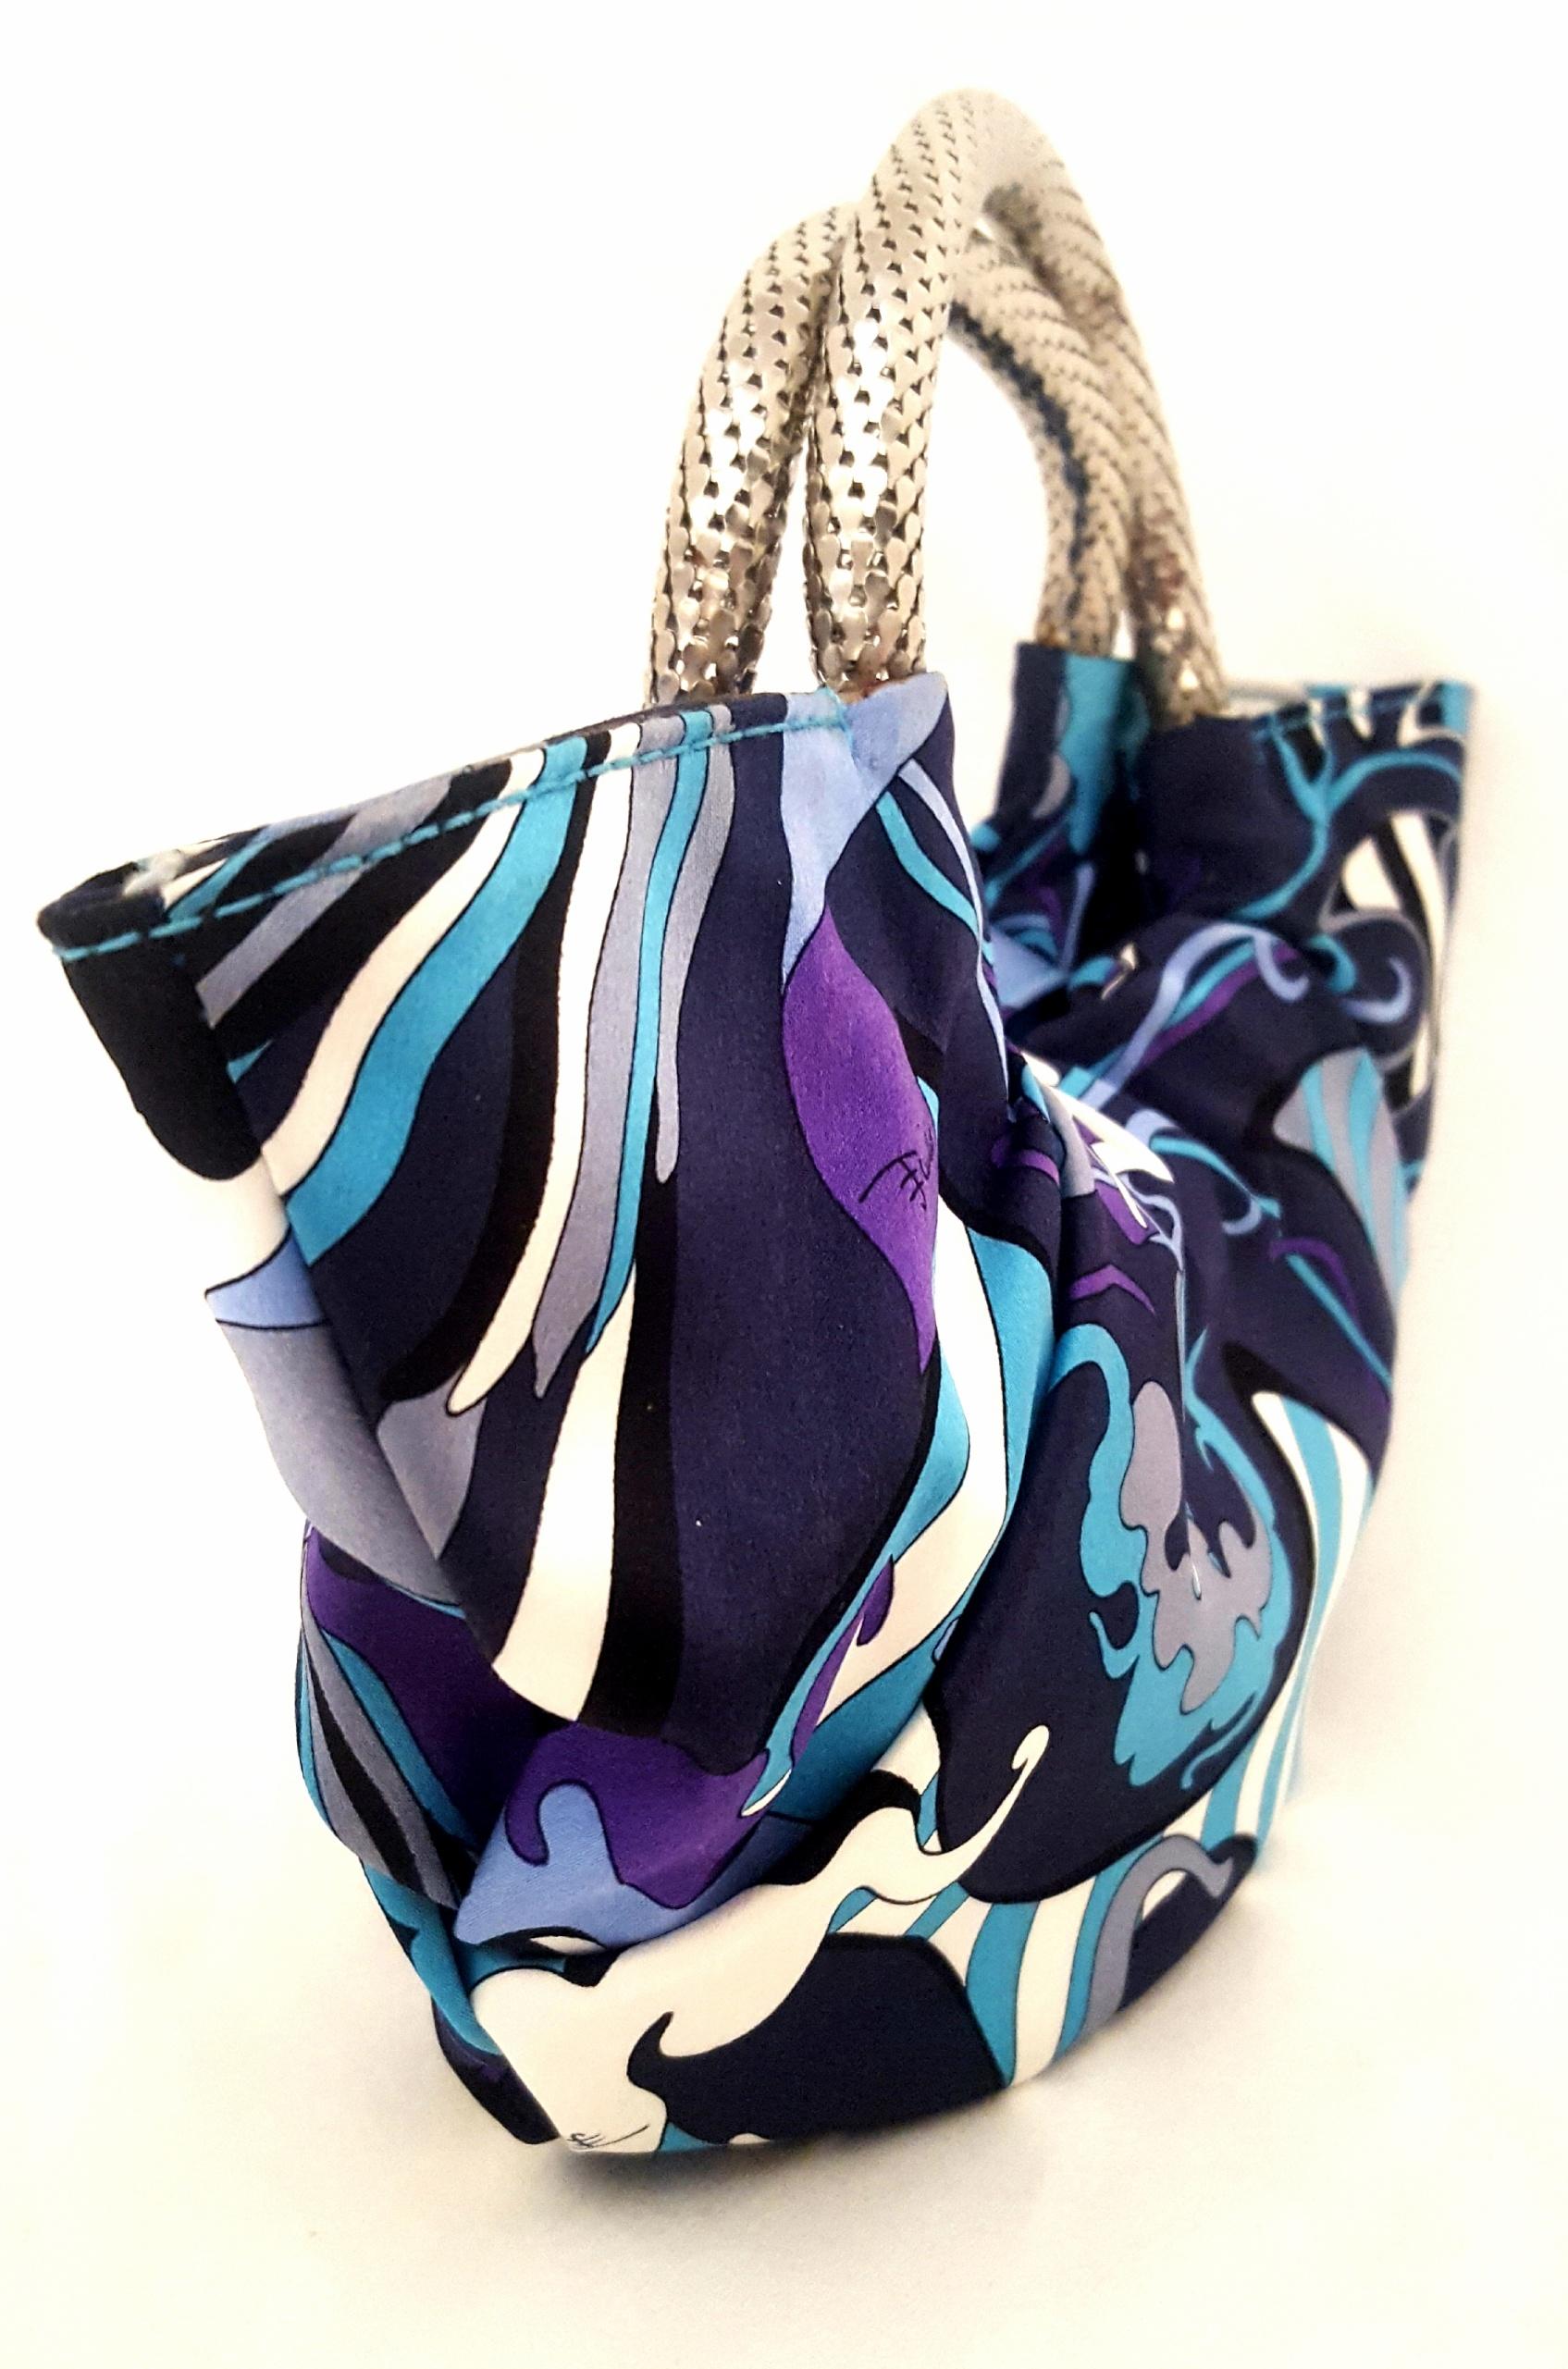 Emilio Pucci was a master of abstract, colorful prints.  Flawlessly crafted in Italy and decorated with a signature floral silk print in blue and purple hues, this bag features woven metal two bracelet handles and is finished with a fabric loop